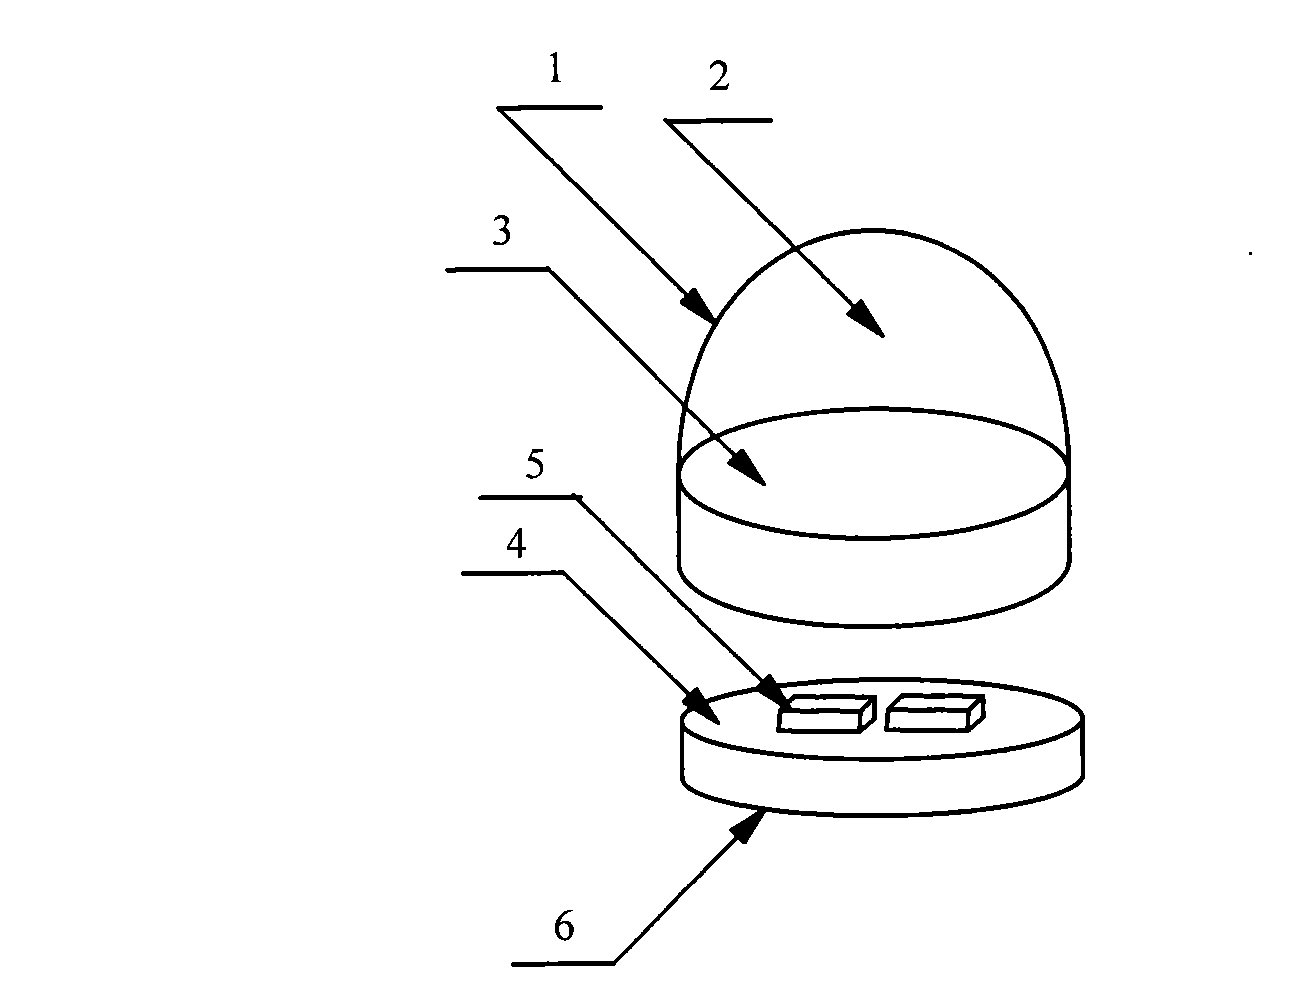 Millimeter-wave quasi-optical integrated dielectric lens antenna and array thereof